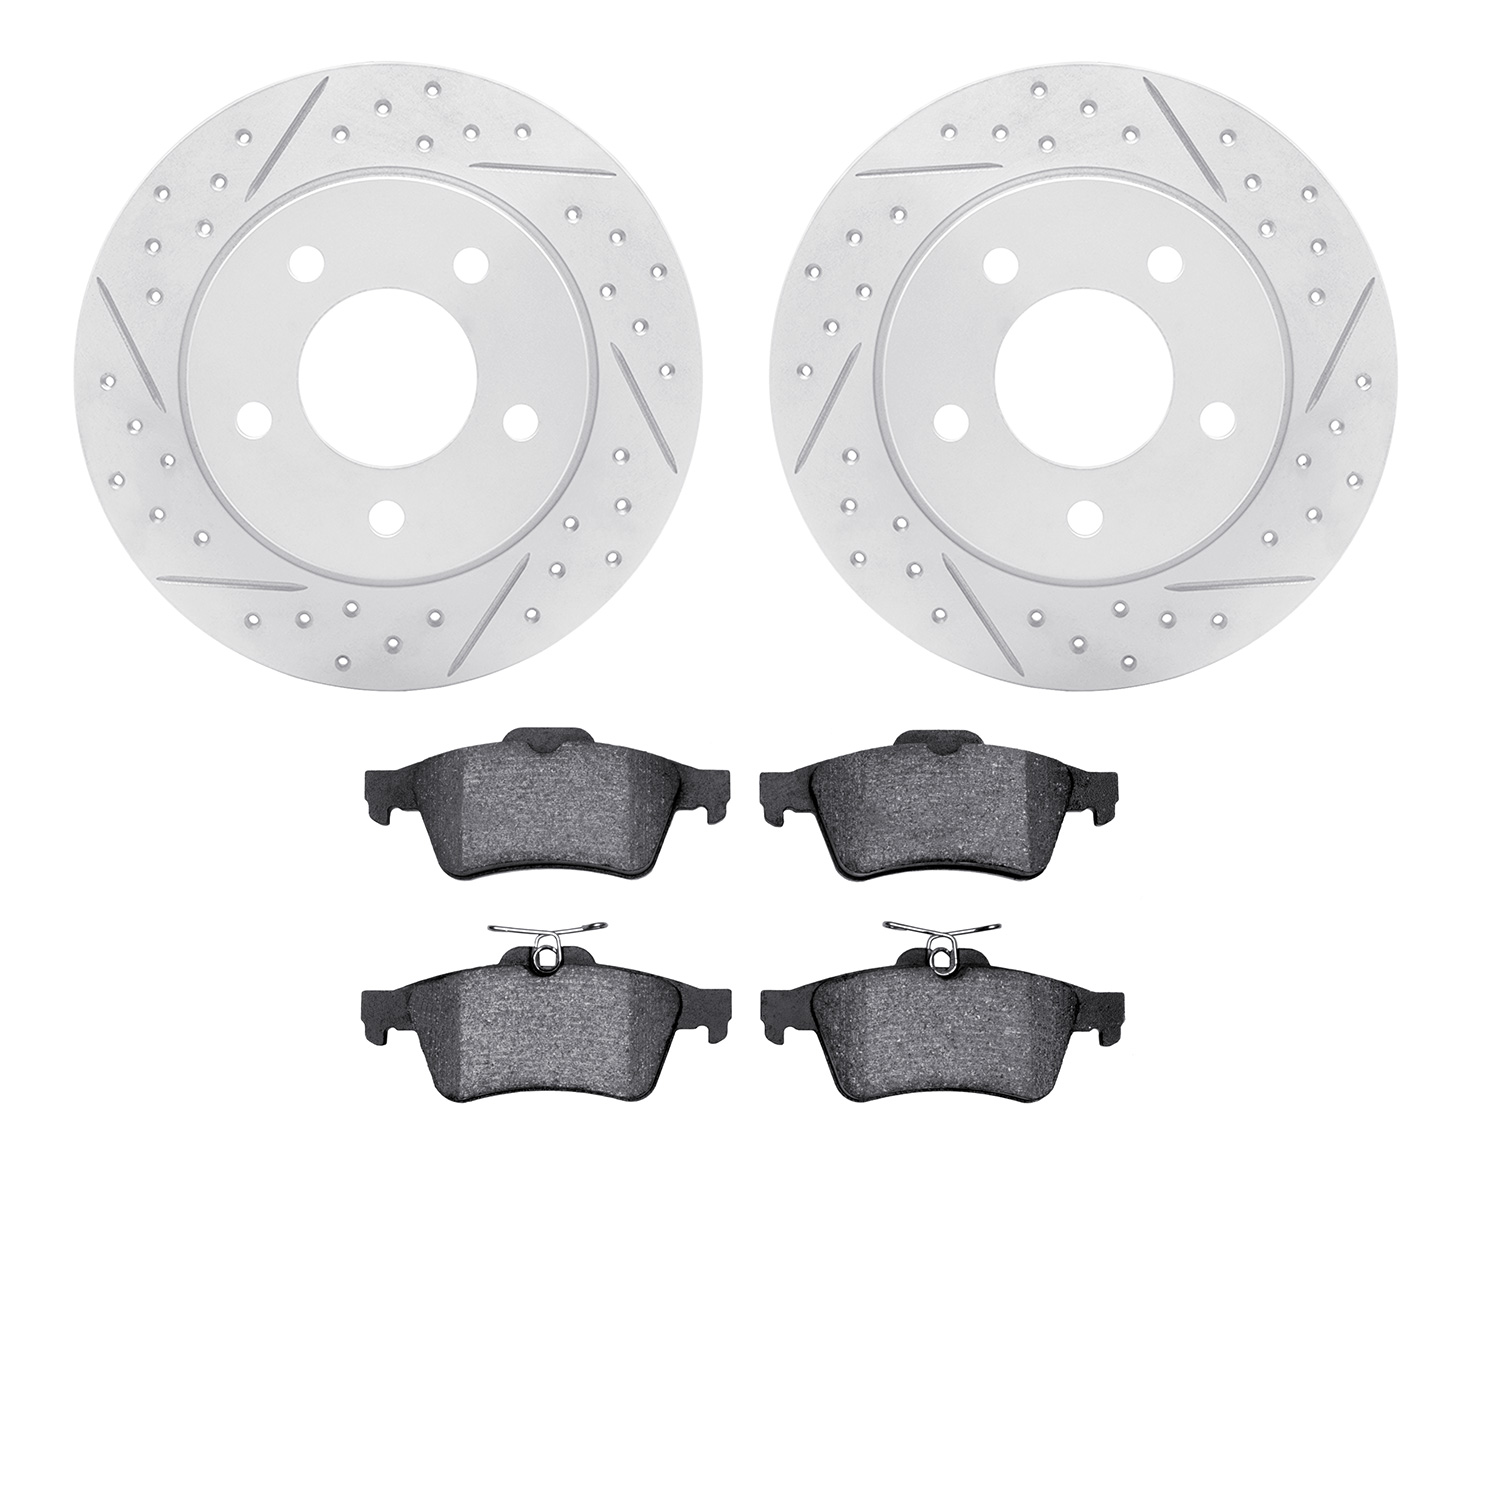 2502-80013 Geoperformance Drilled/Slotted Rotors w/5000 Advanced Brake Pads Kit, 2004-2013 Ford/Lincoln/Mercury/Mazda, Position: